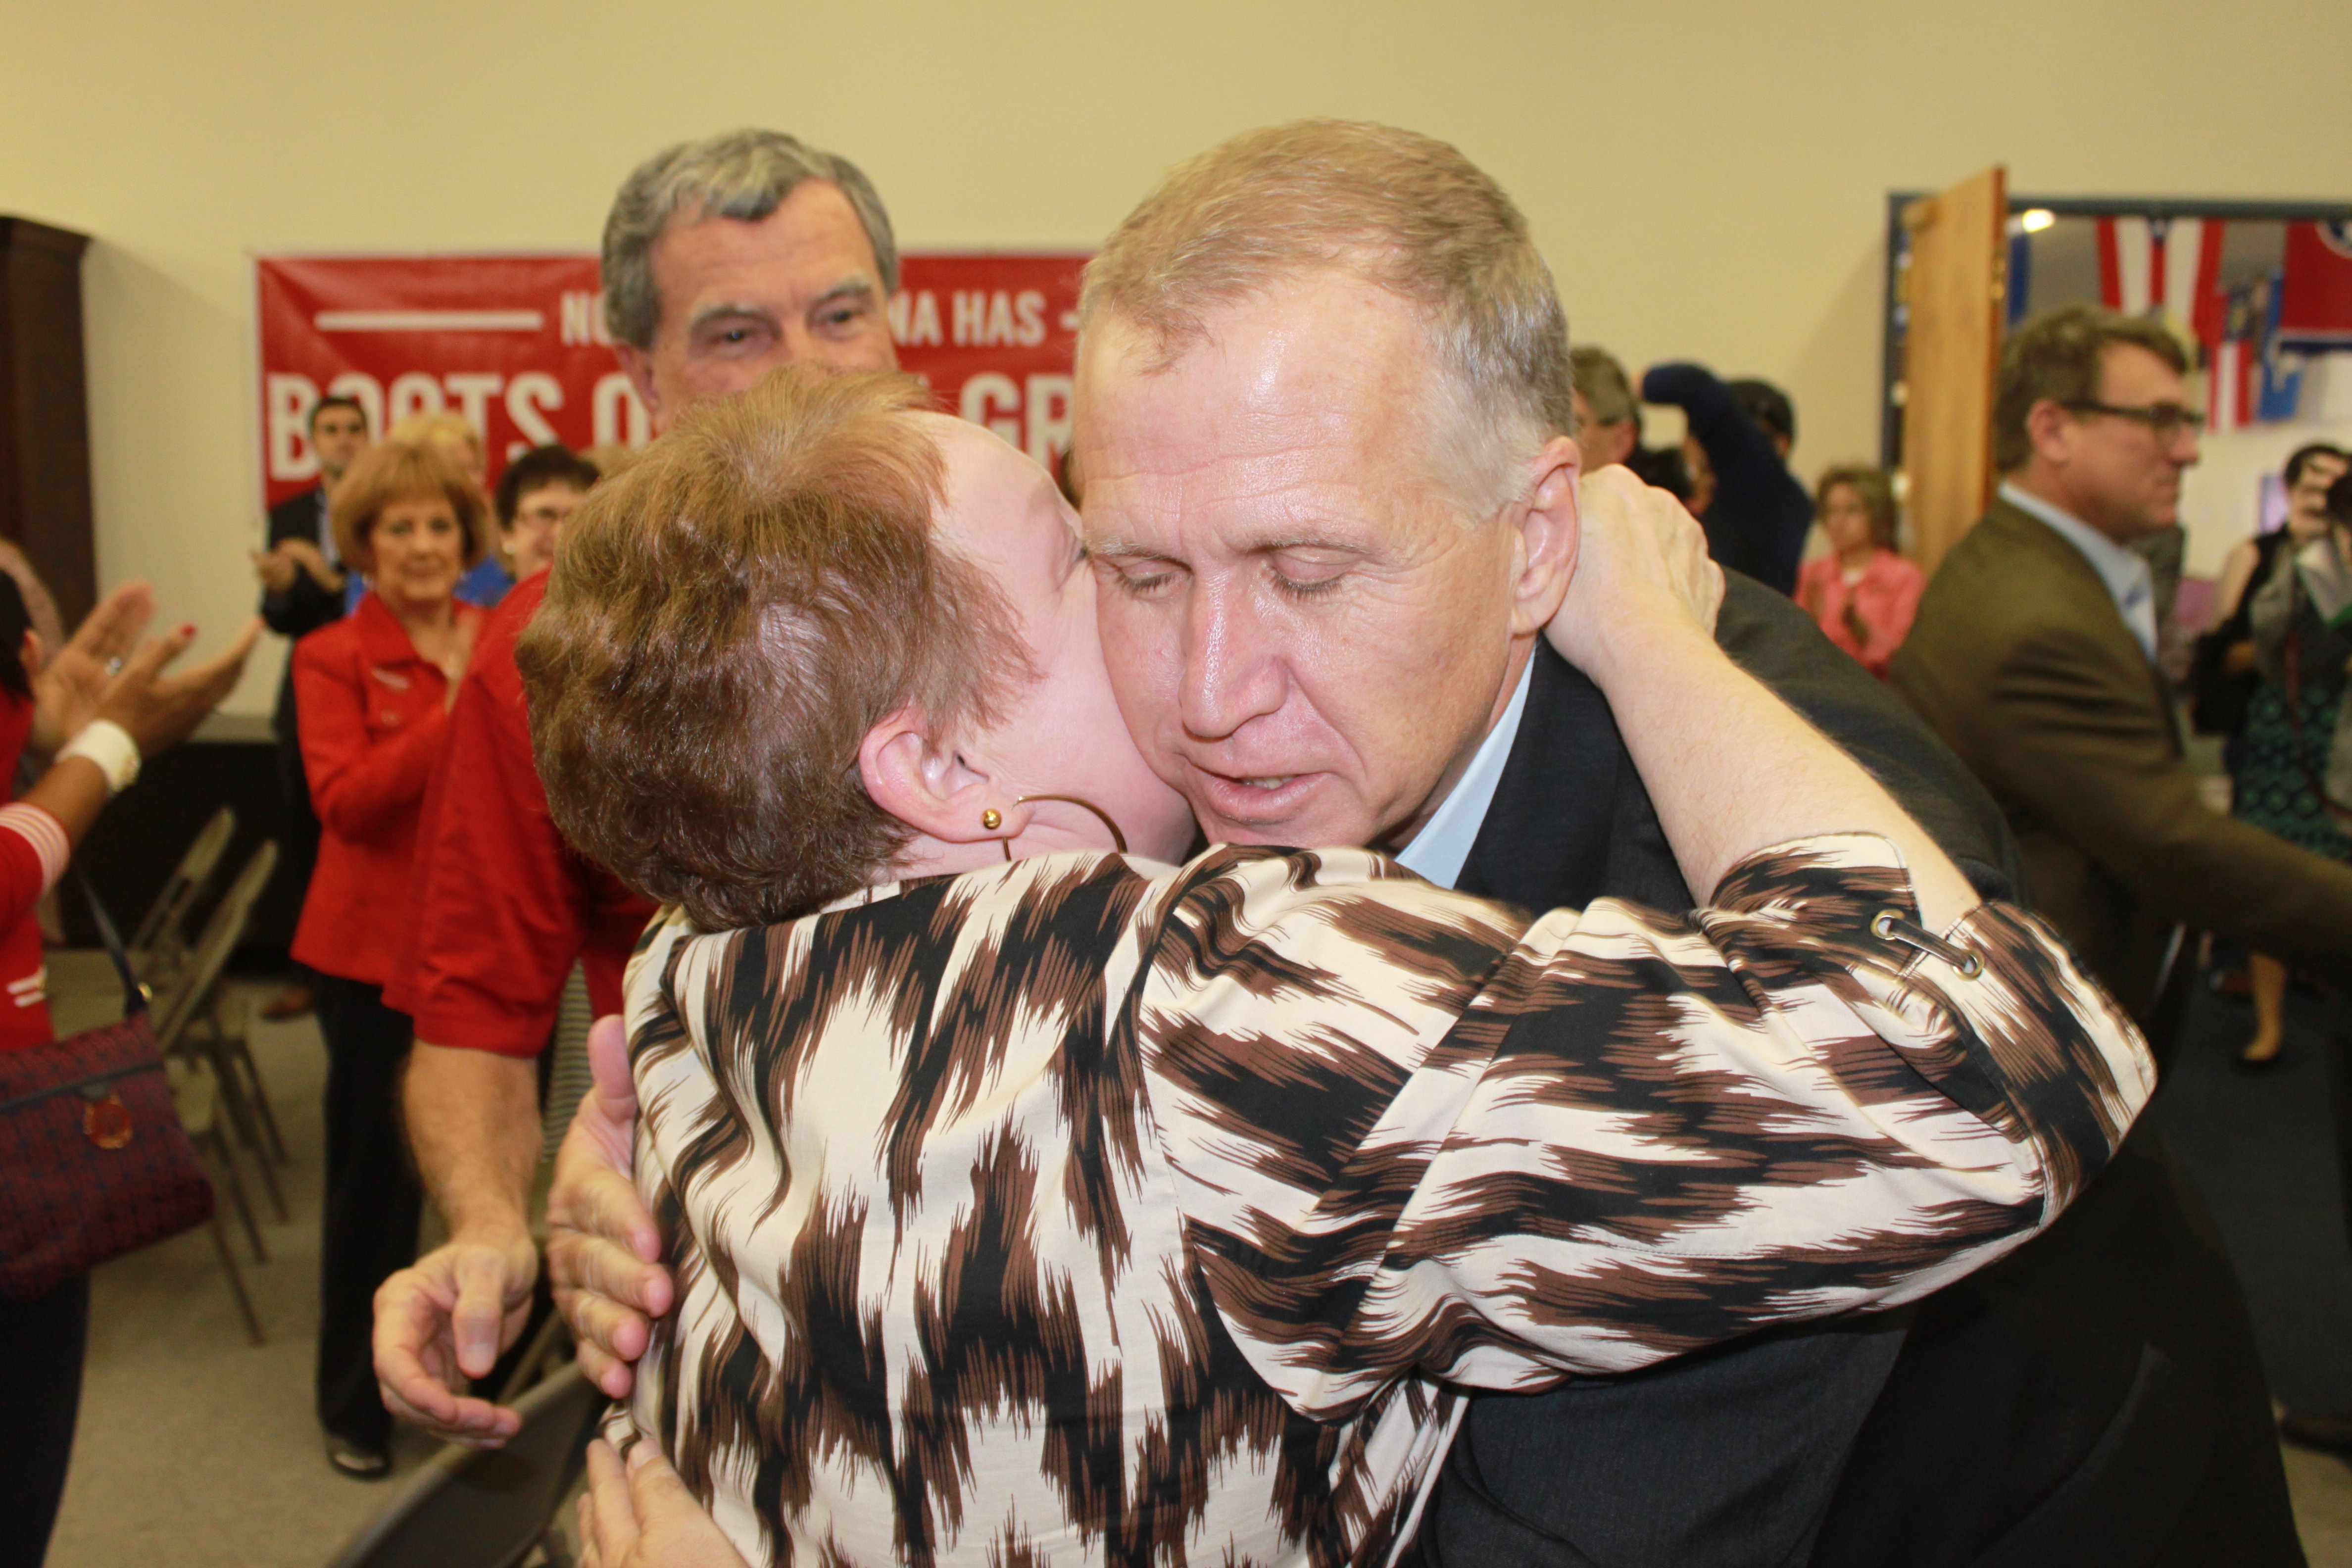 At the second rally in Greensboro, Tillis felt comfortable with familiar faces. Photo: Josh Siegel/The Daily Signal